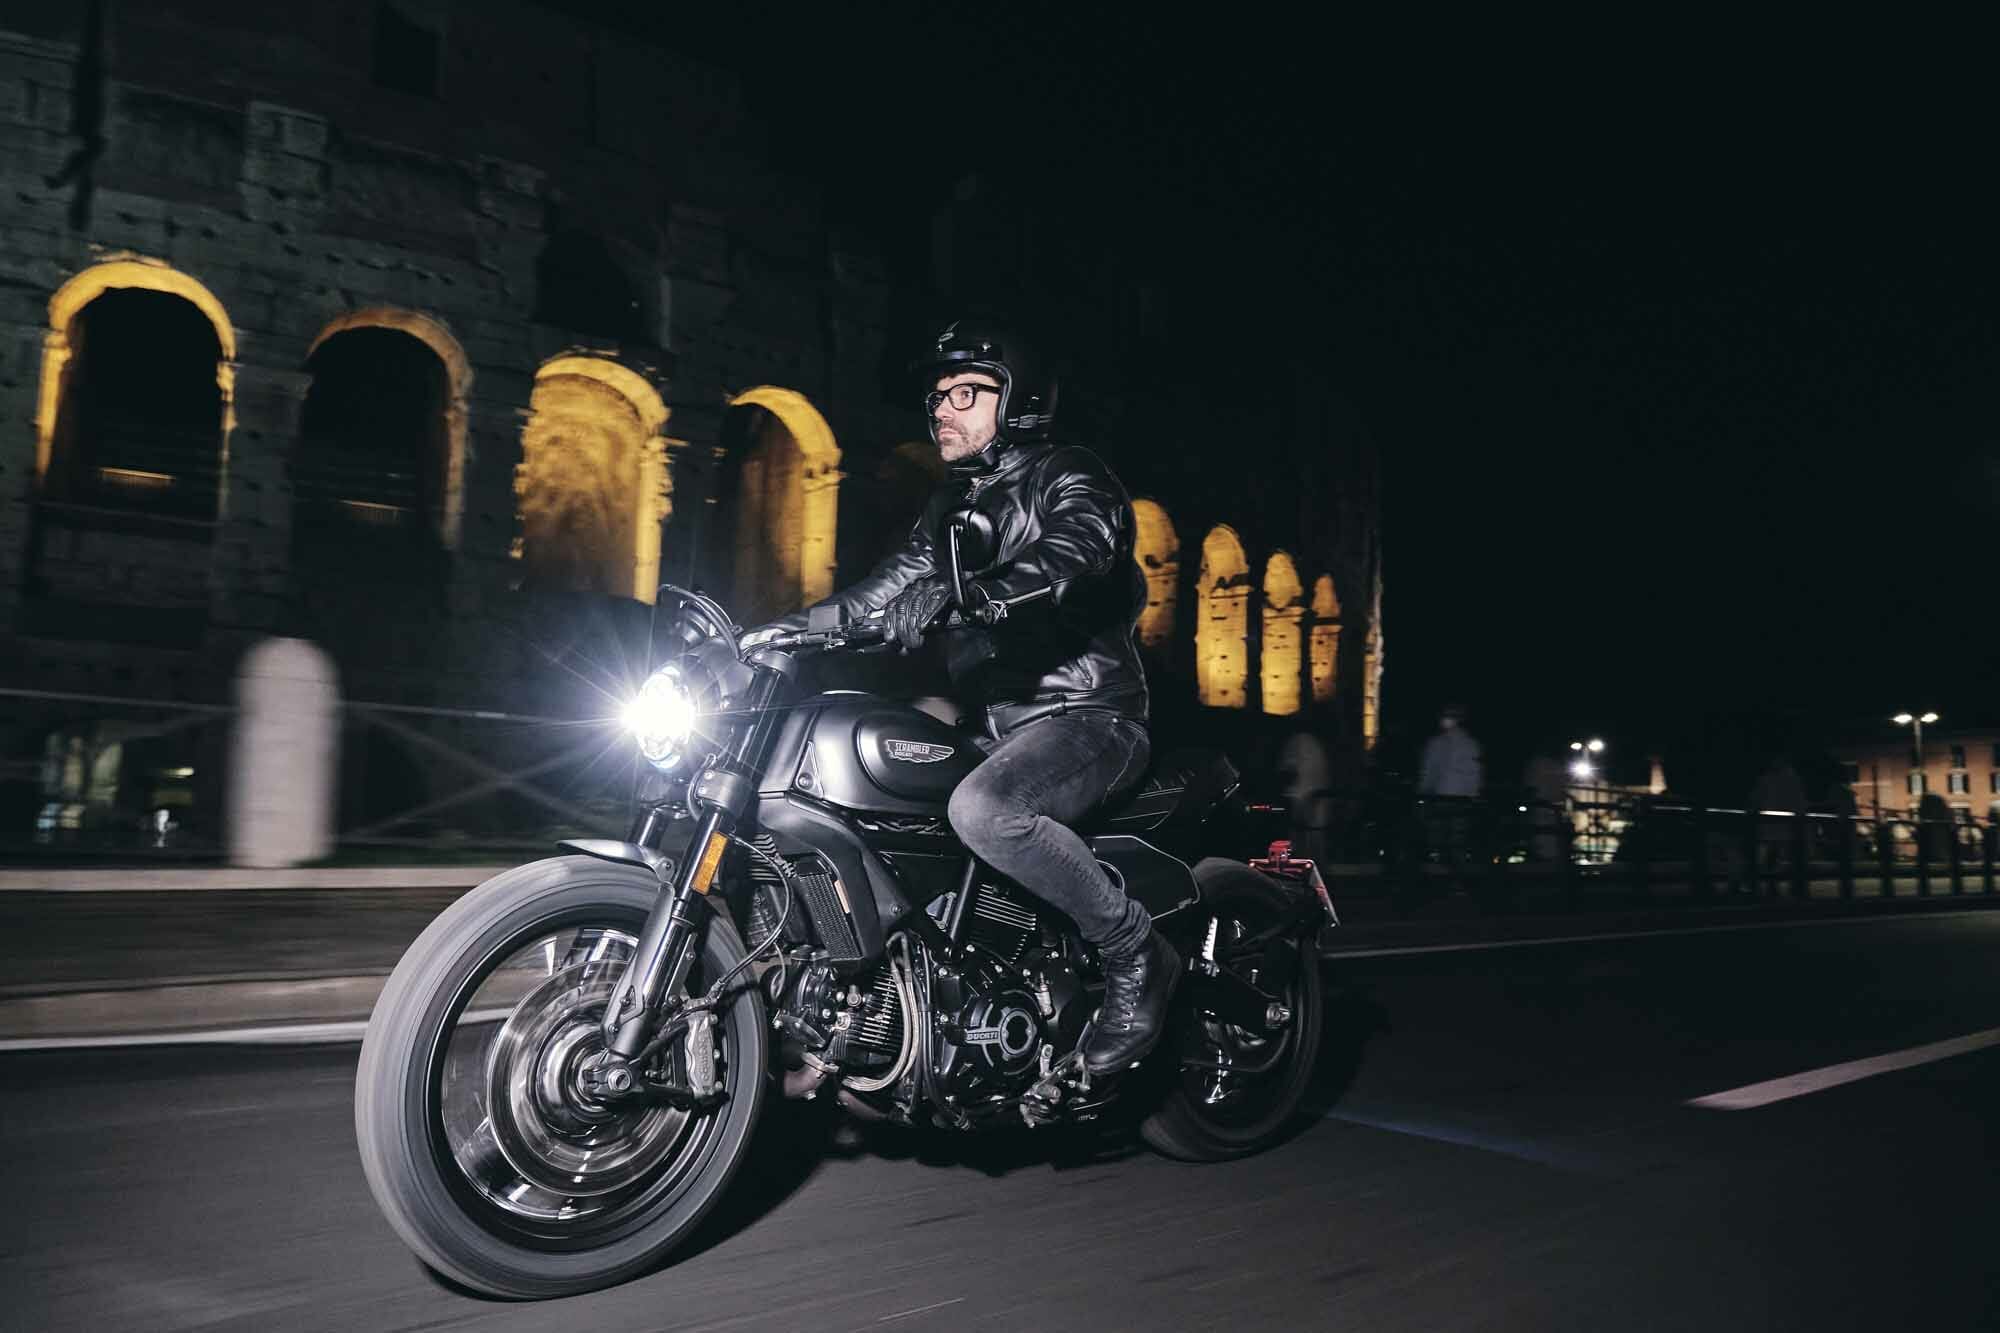 The new Ducati Scrambler models for 2021
- also in the App MOTORCYCLE NEWS